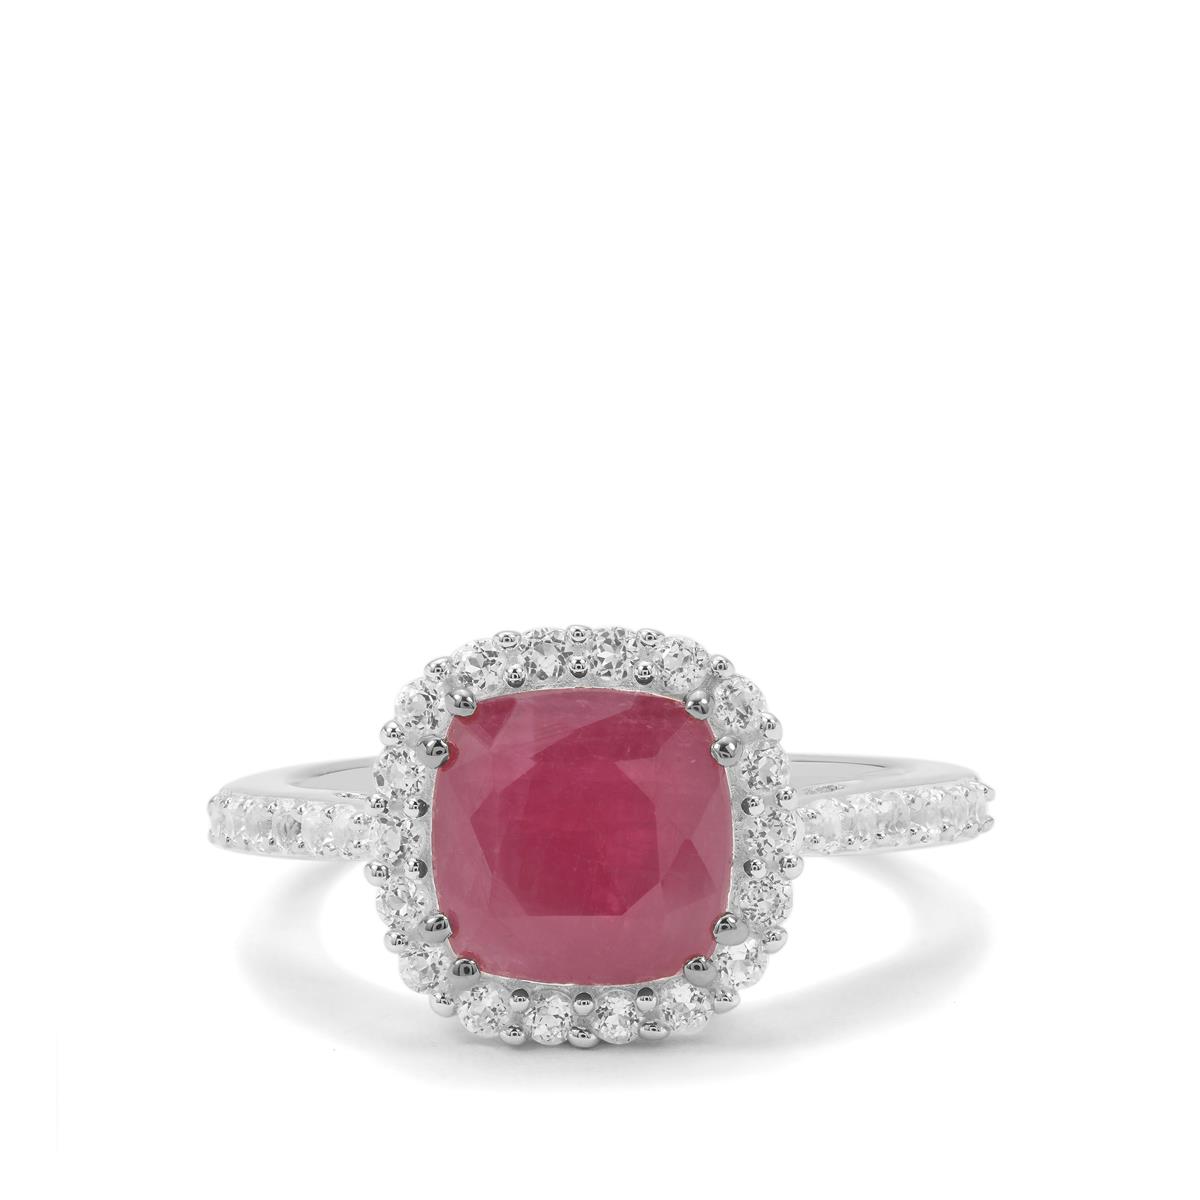 Bharat Ruby & White Topaz Sterling Silver Ring ATGW 3.70cts | Gemporia